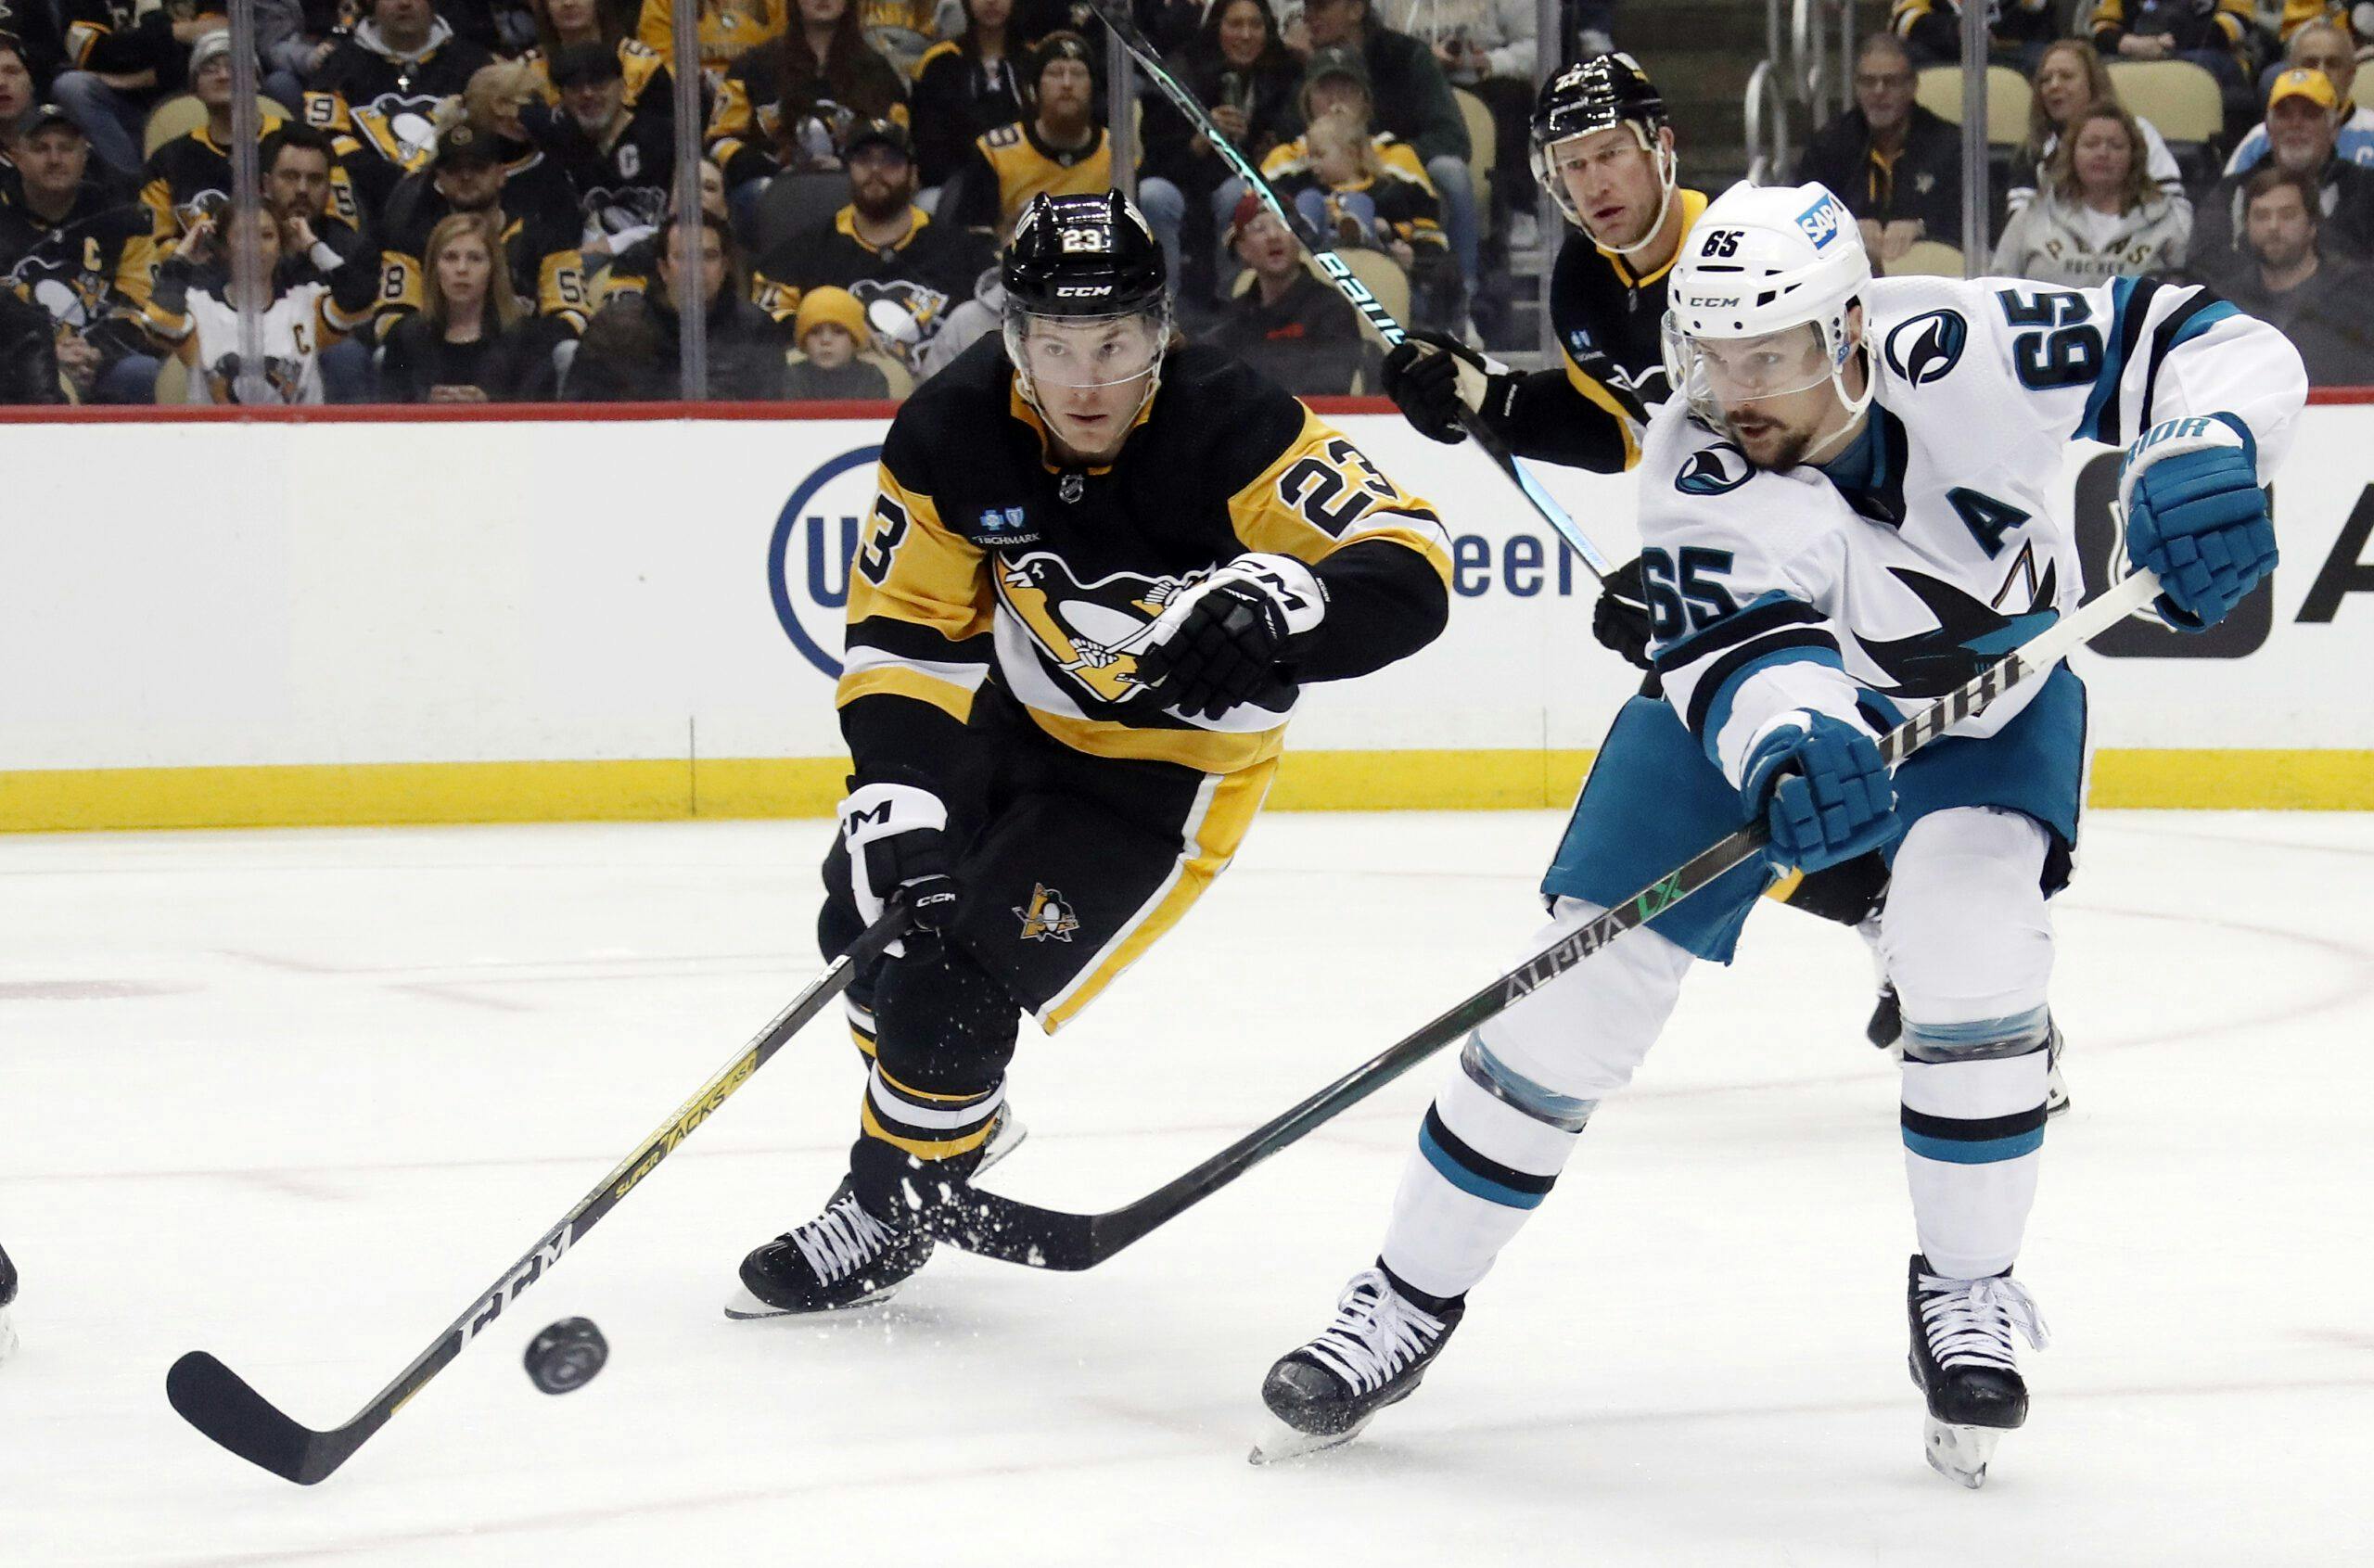 Penguins and the Capitals keep making moves to try to remain NHL